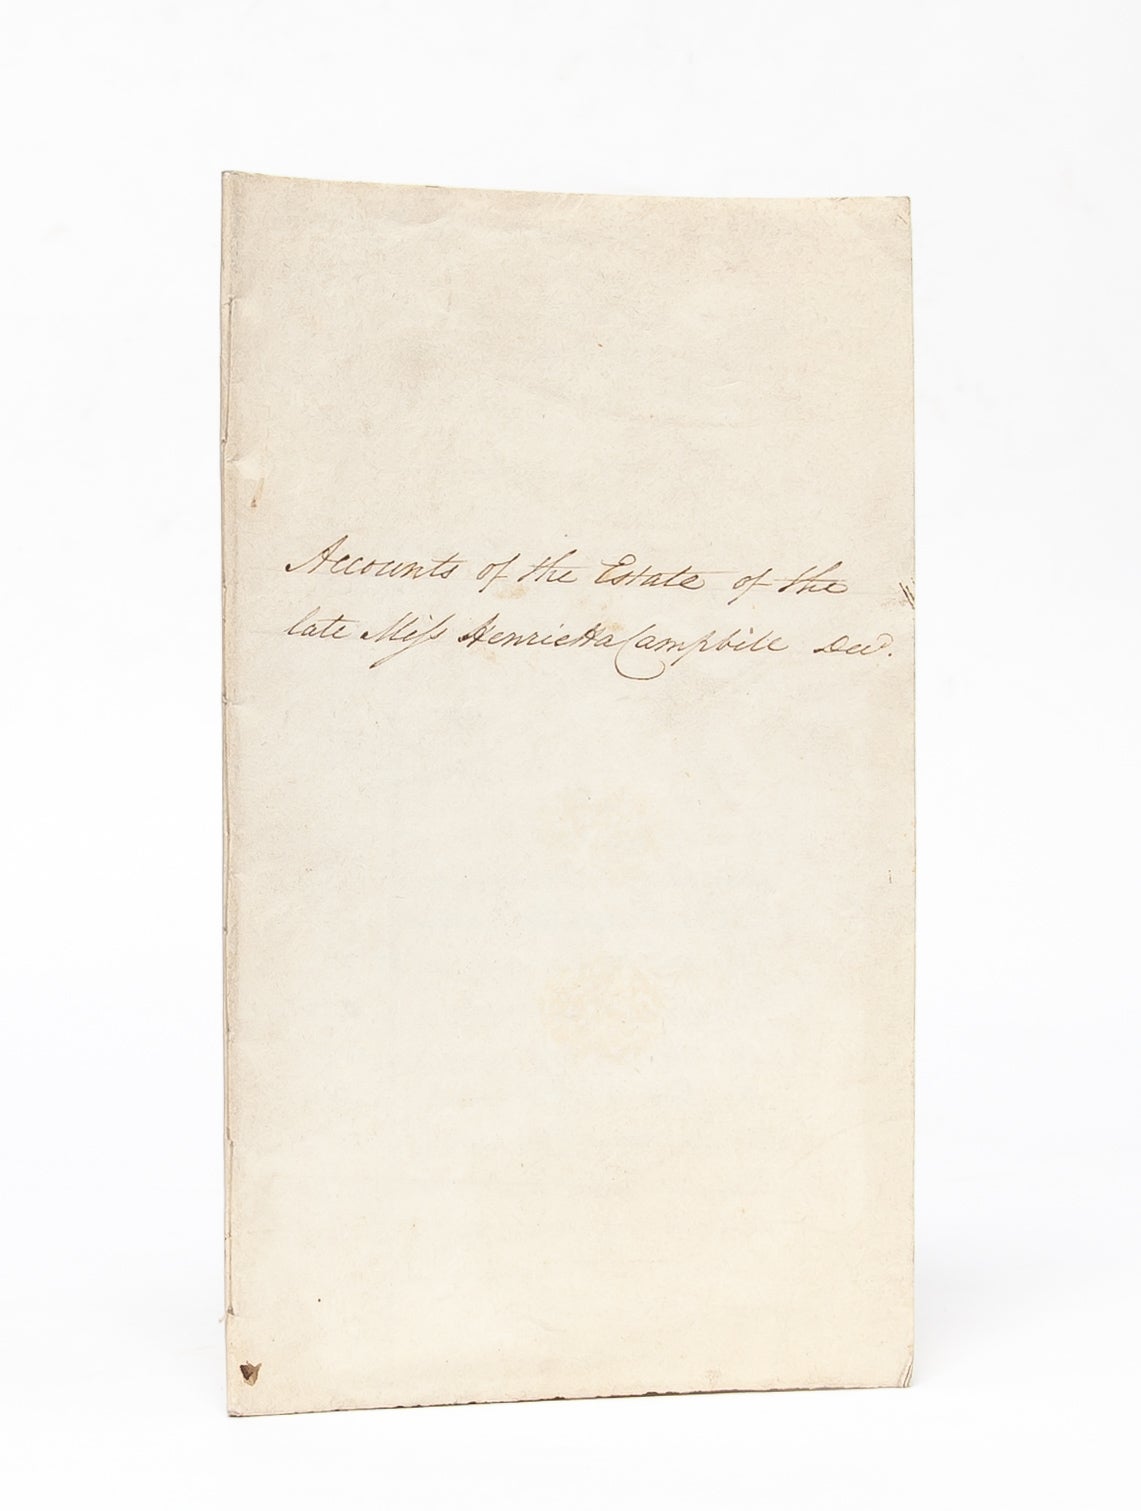 (Item #5065) Accounts of the Estate of the late Miss Henrietta Campbell, Dec[eased]. Women's Property Rights.